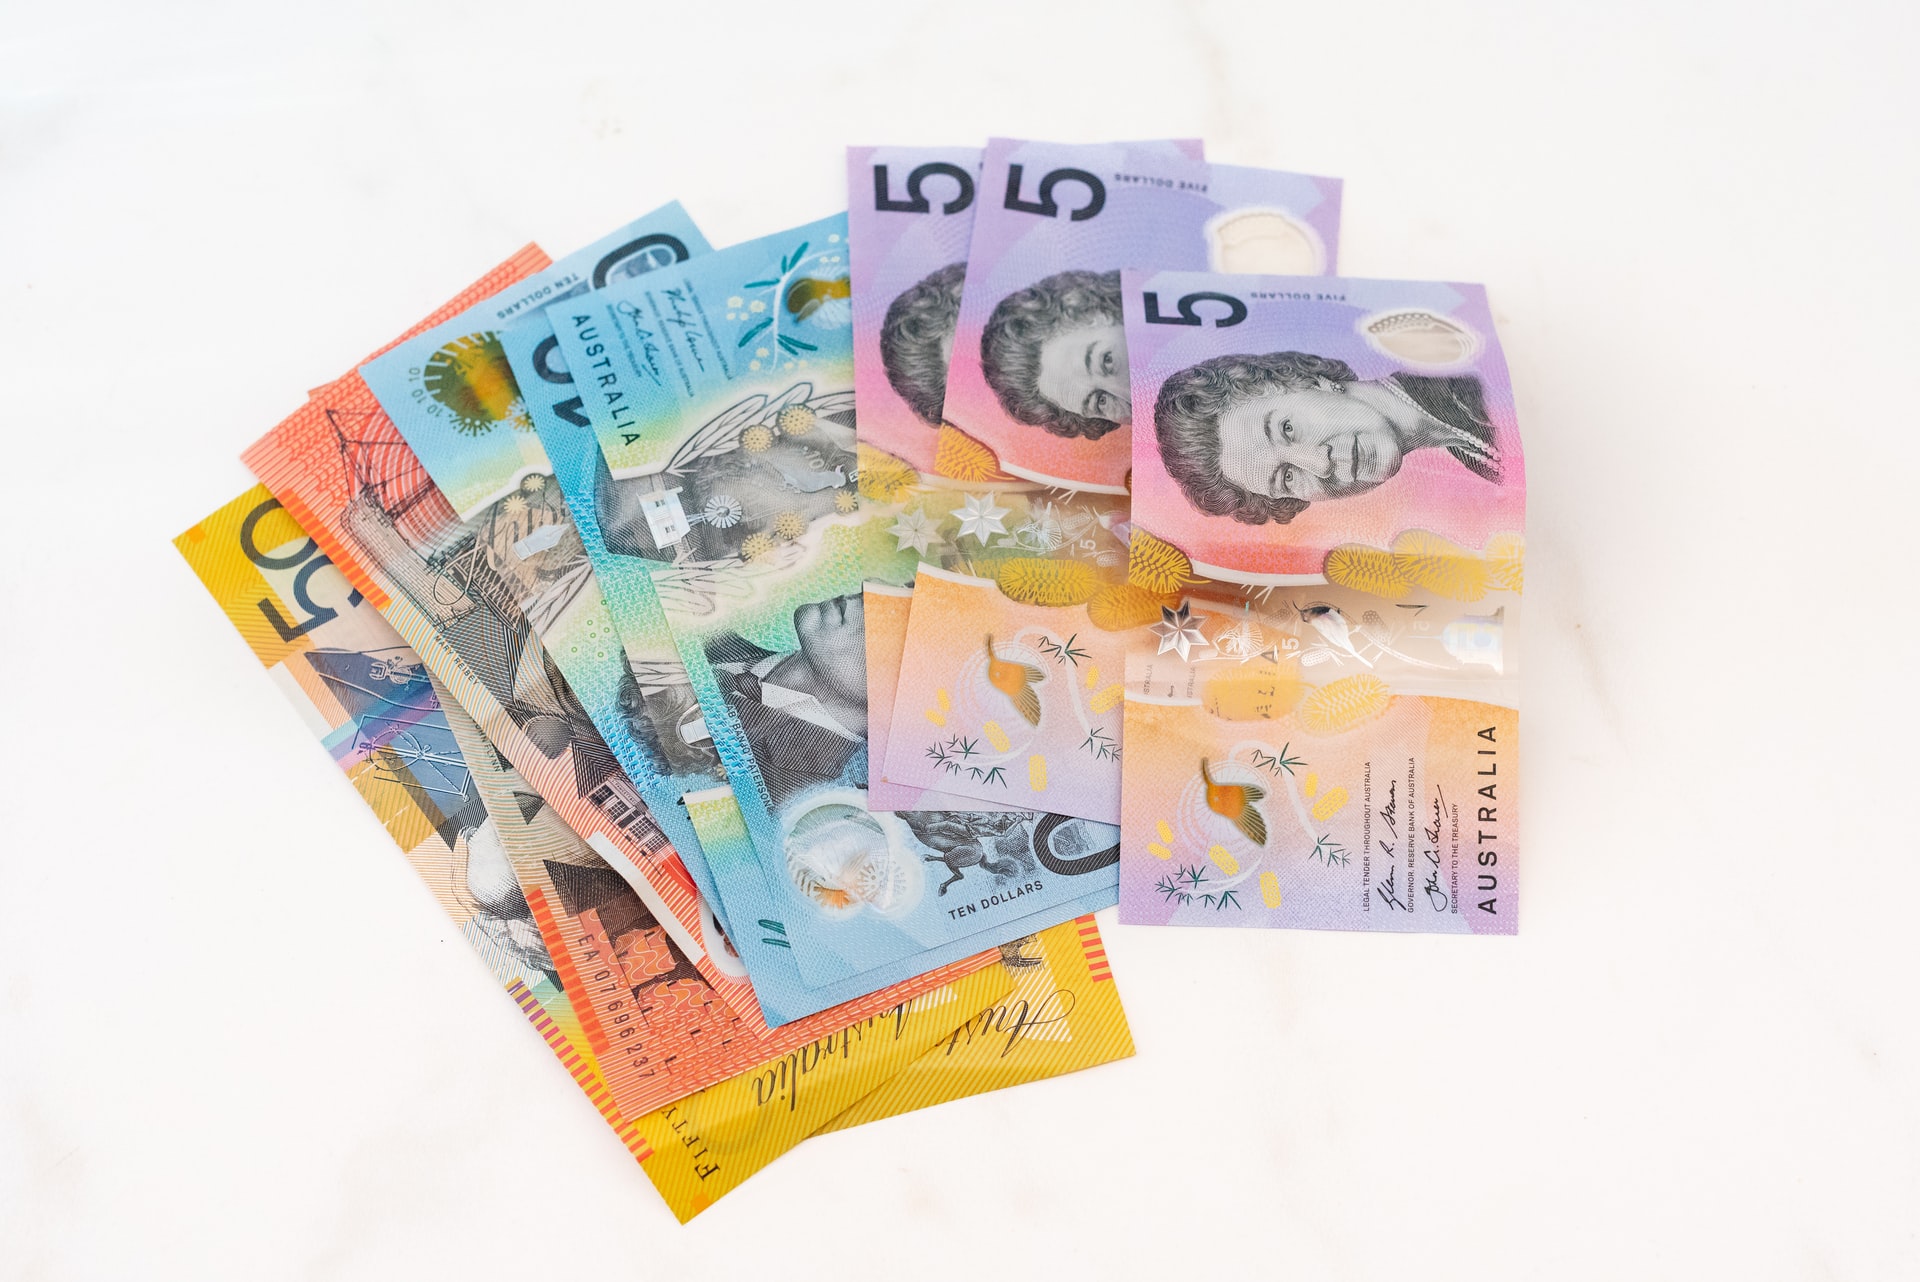 Australian cash notes laid out on a white background.